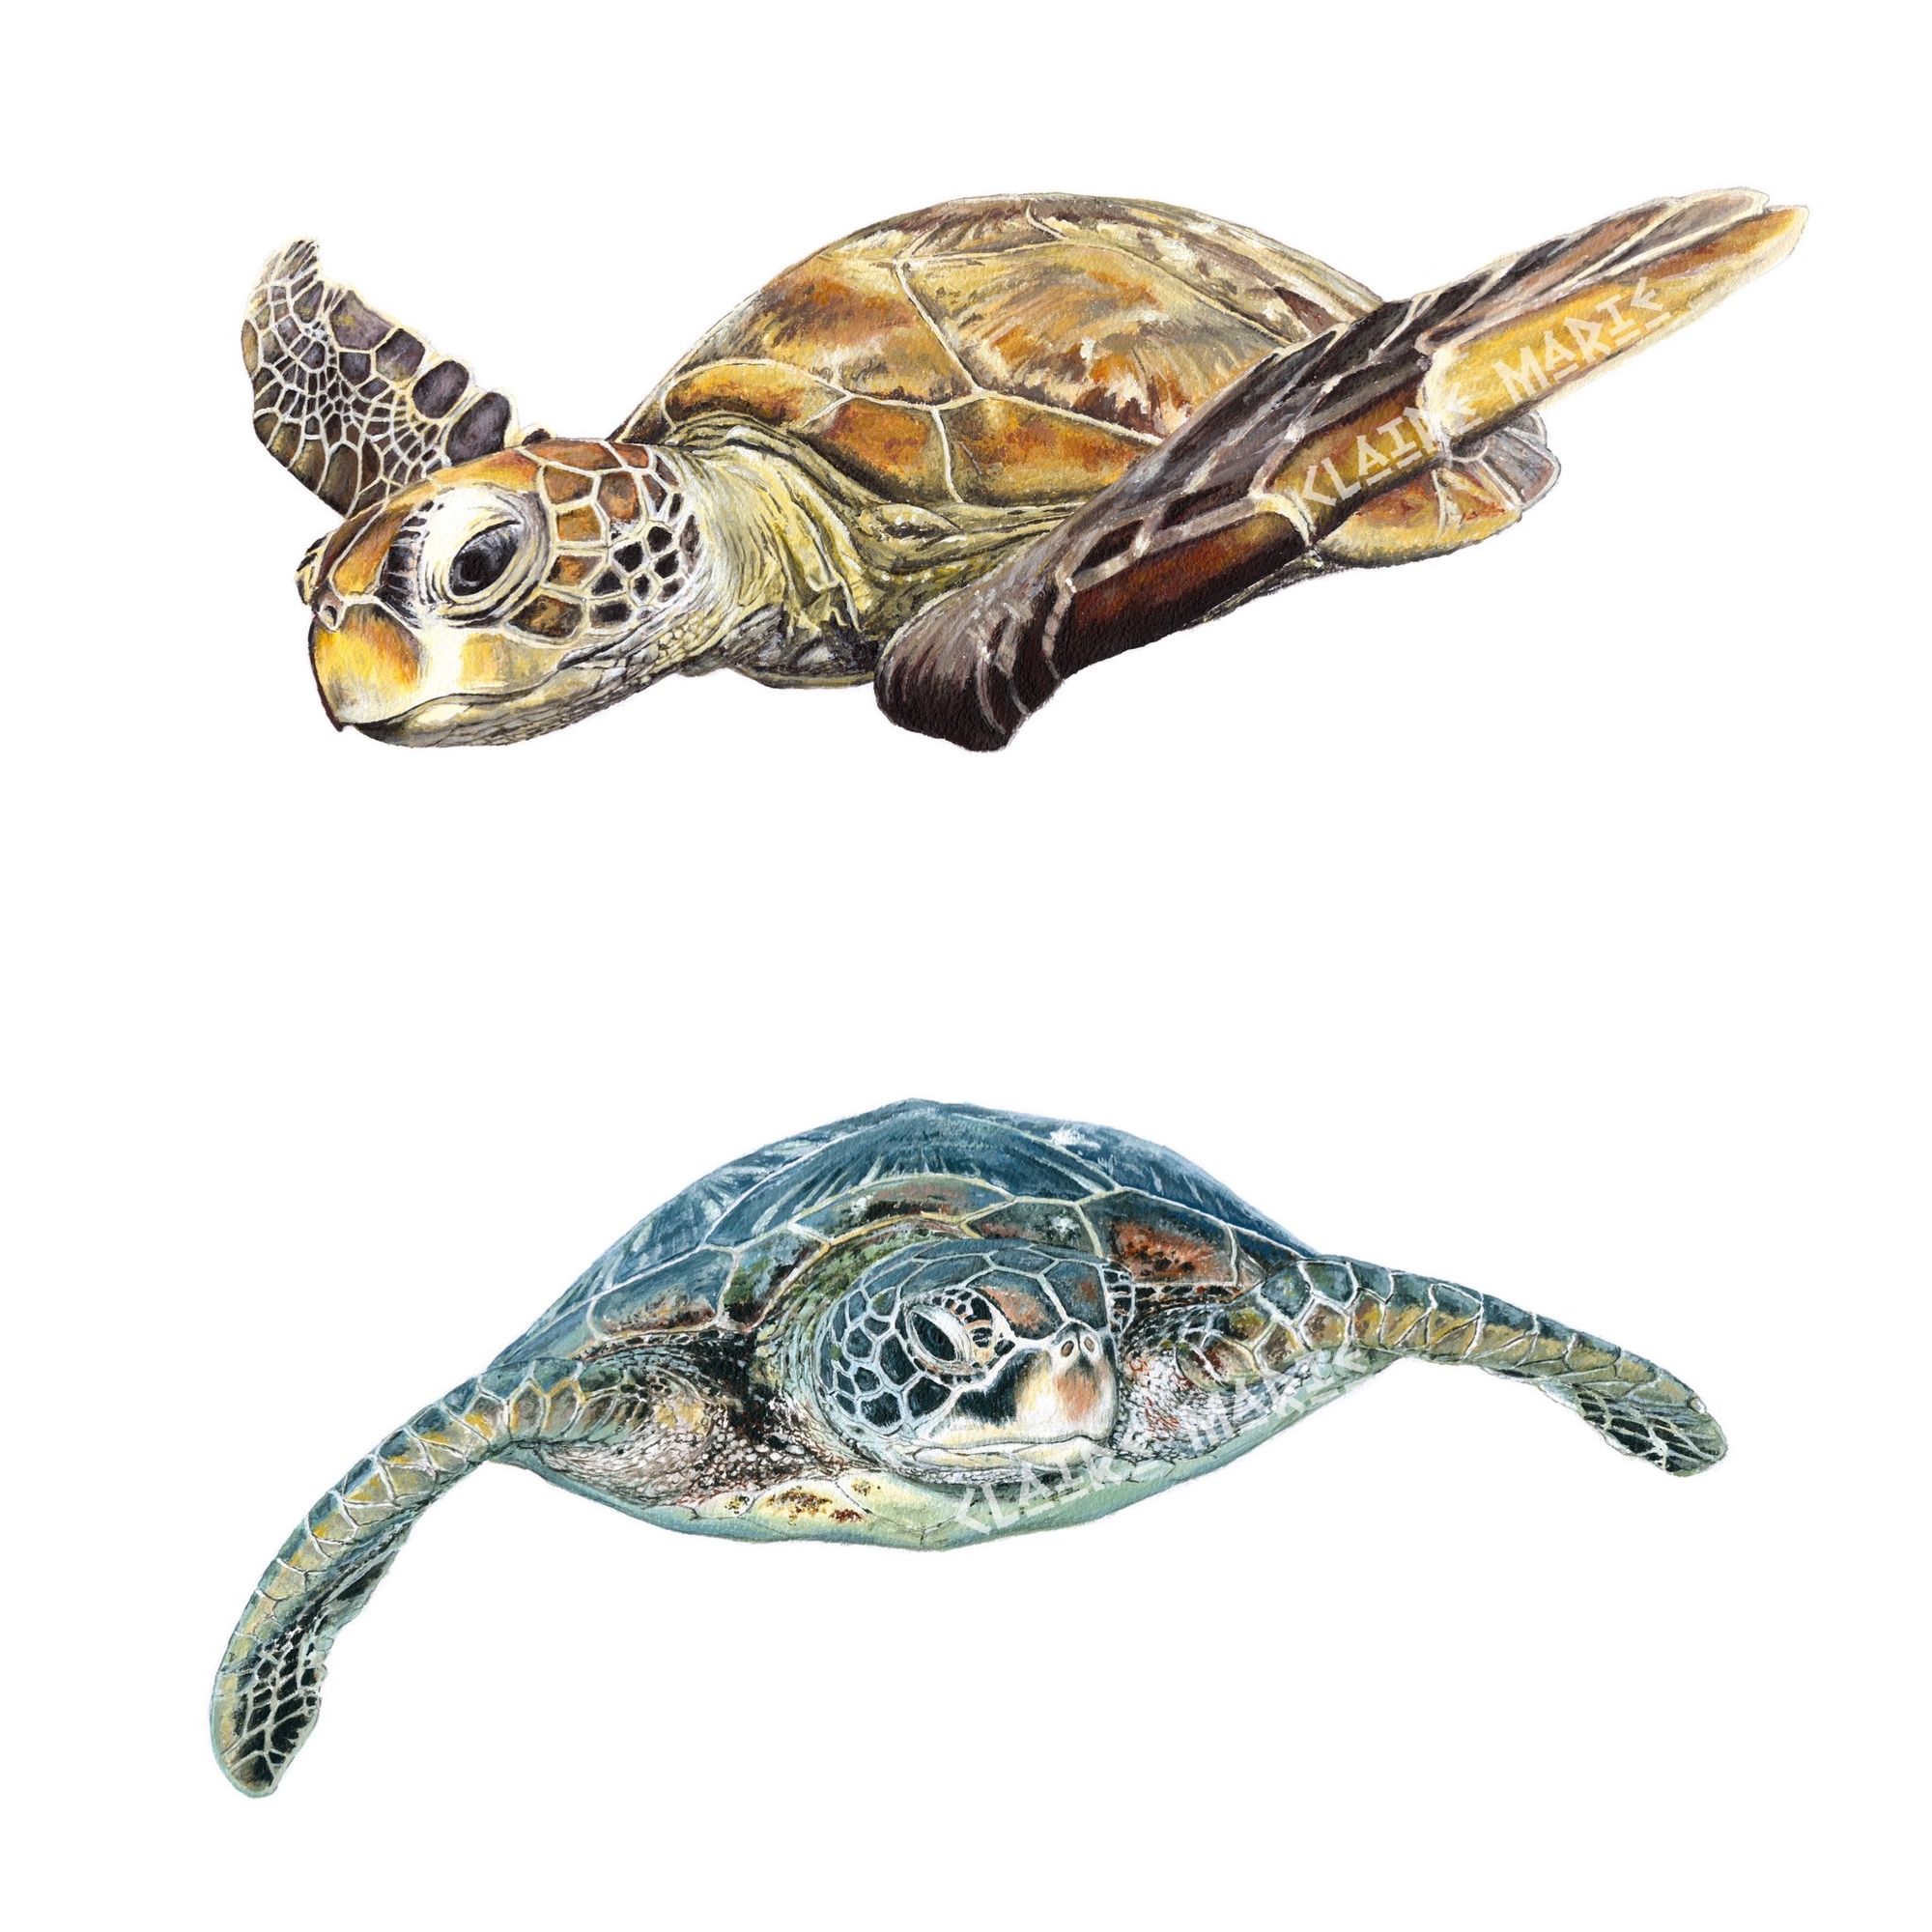 Did you know these five facts about sea turtles?